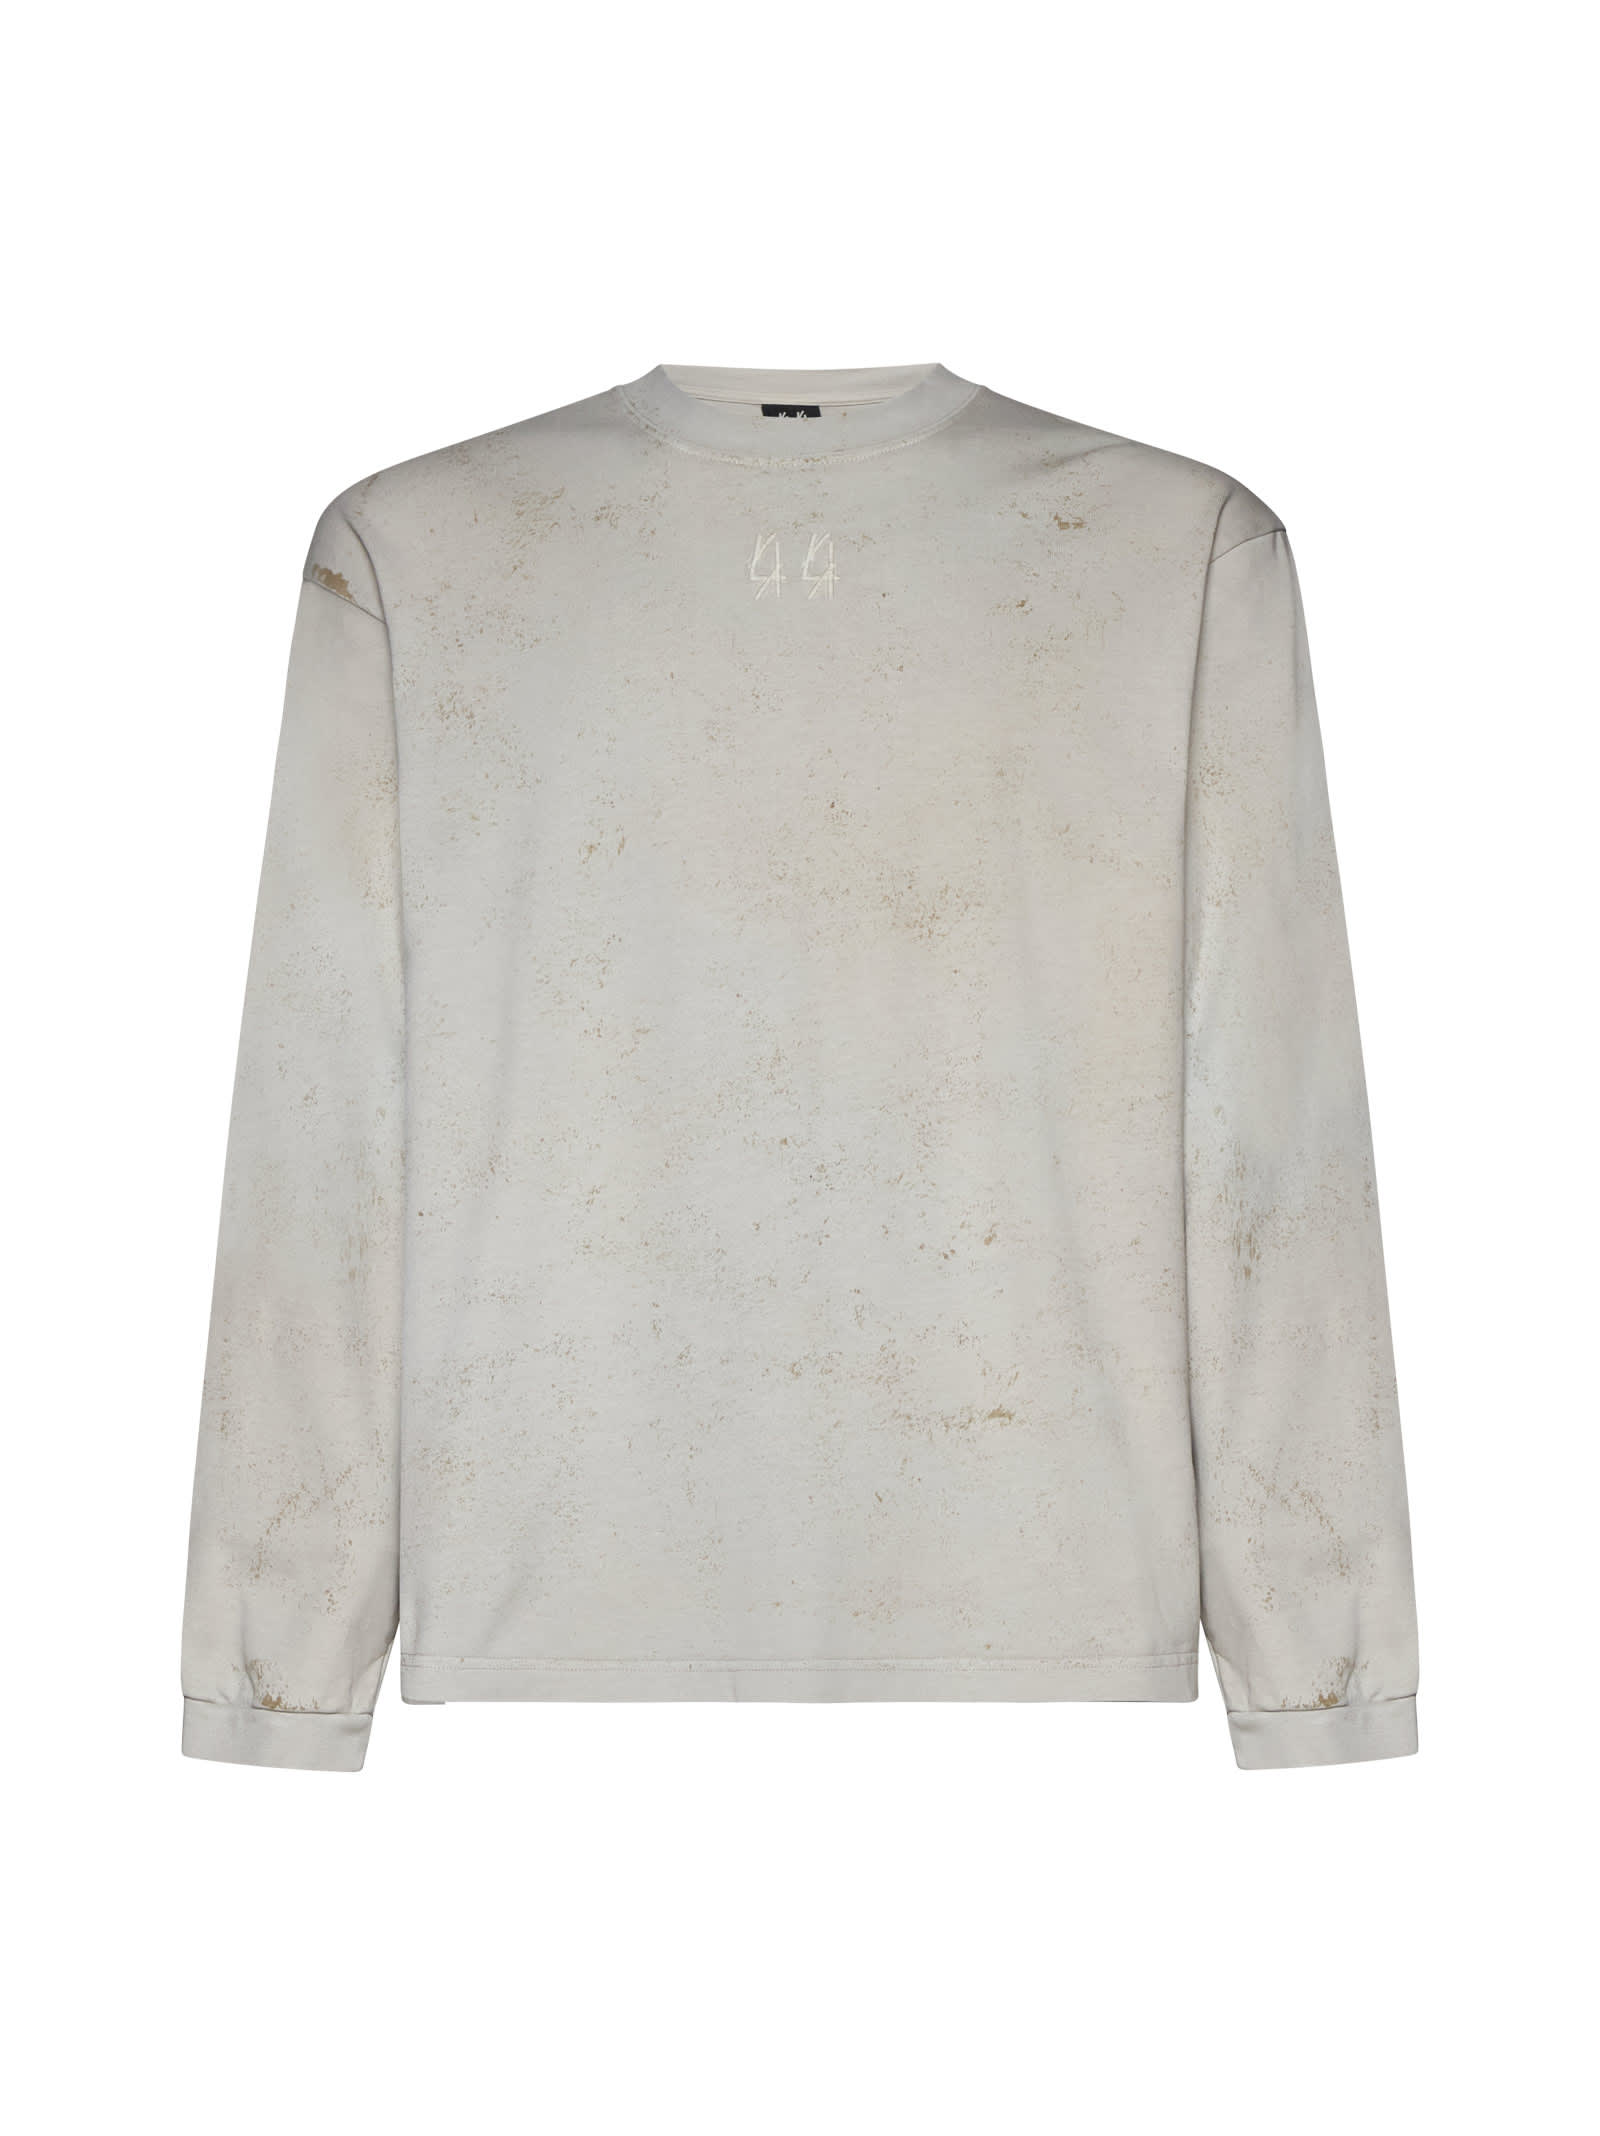 Shop 44 Label Group Sweater In Dirty White+gyps